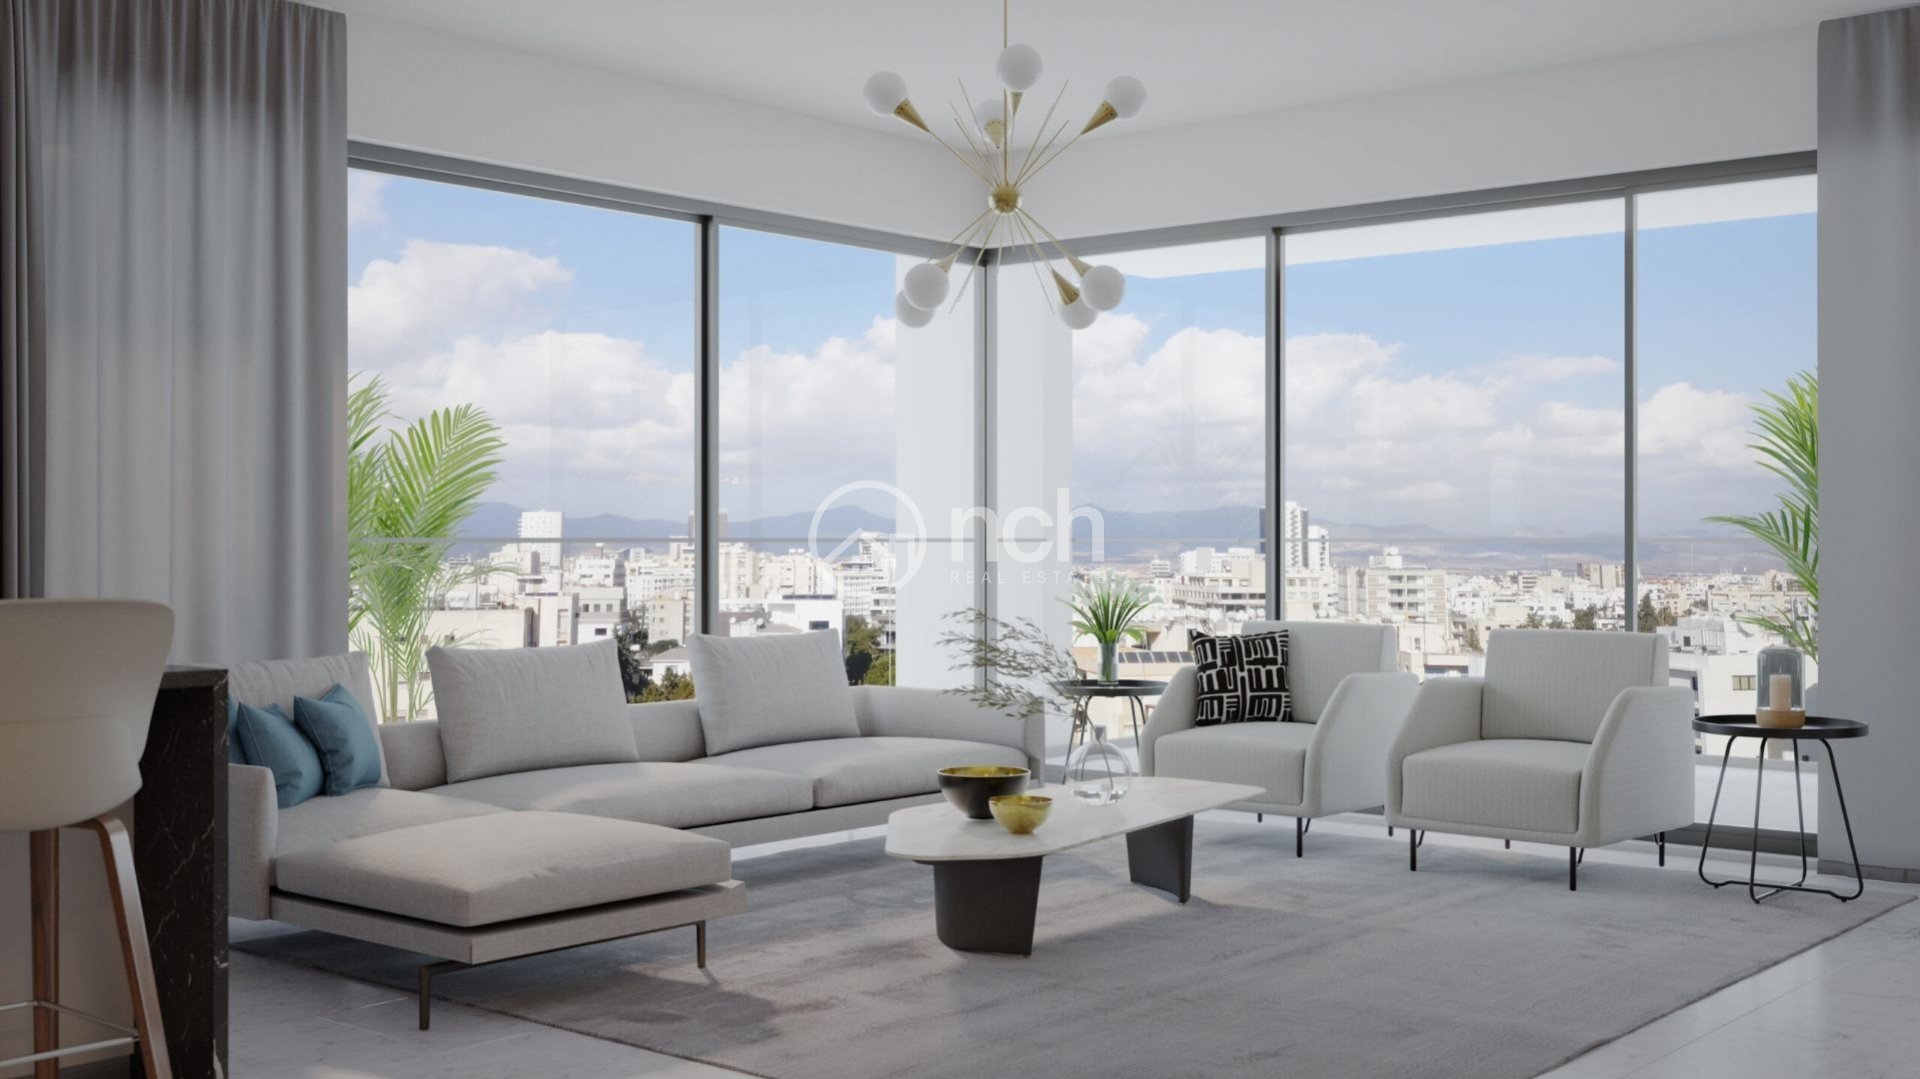 1 Bedroom Apartment for Sale in Strovolos – Acropolis, Nicosia District